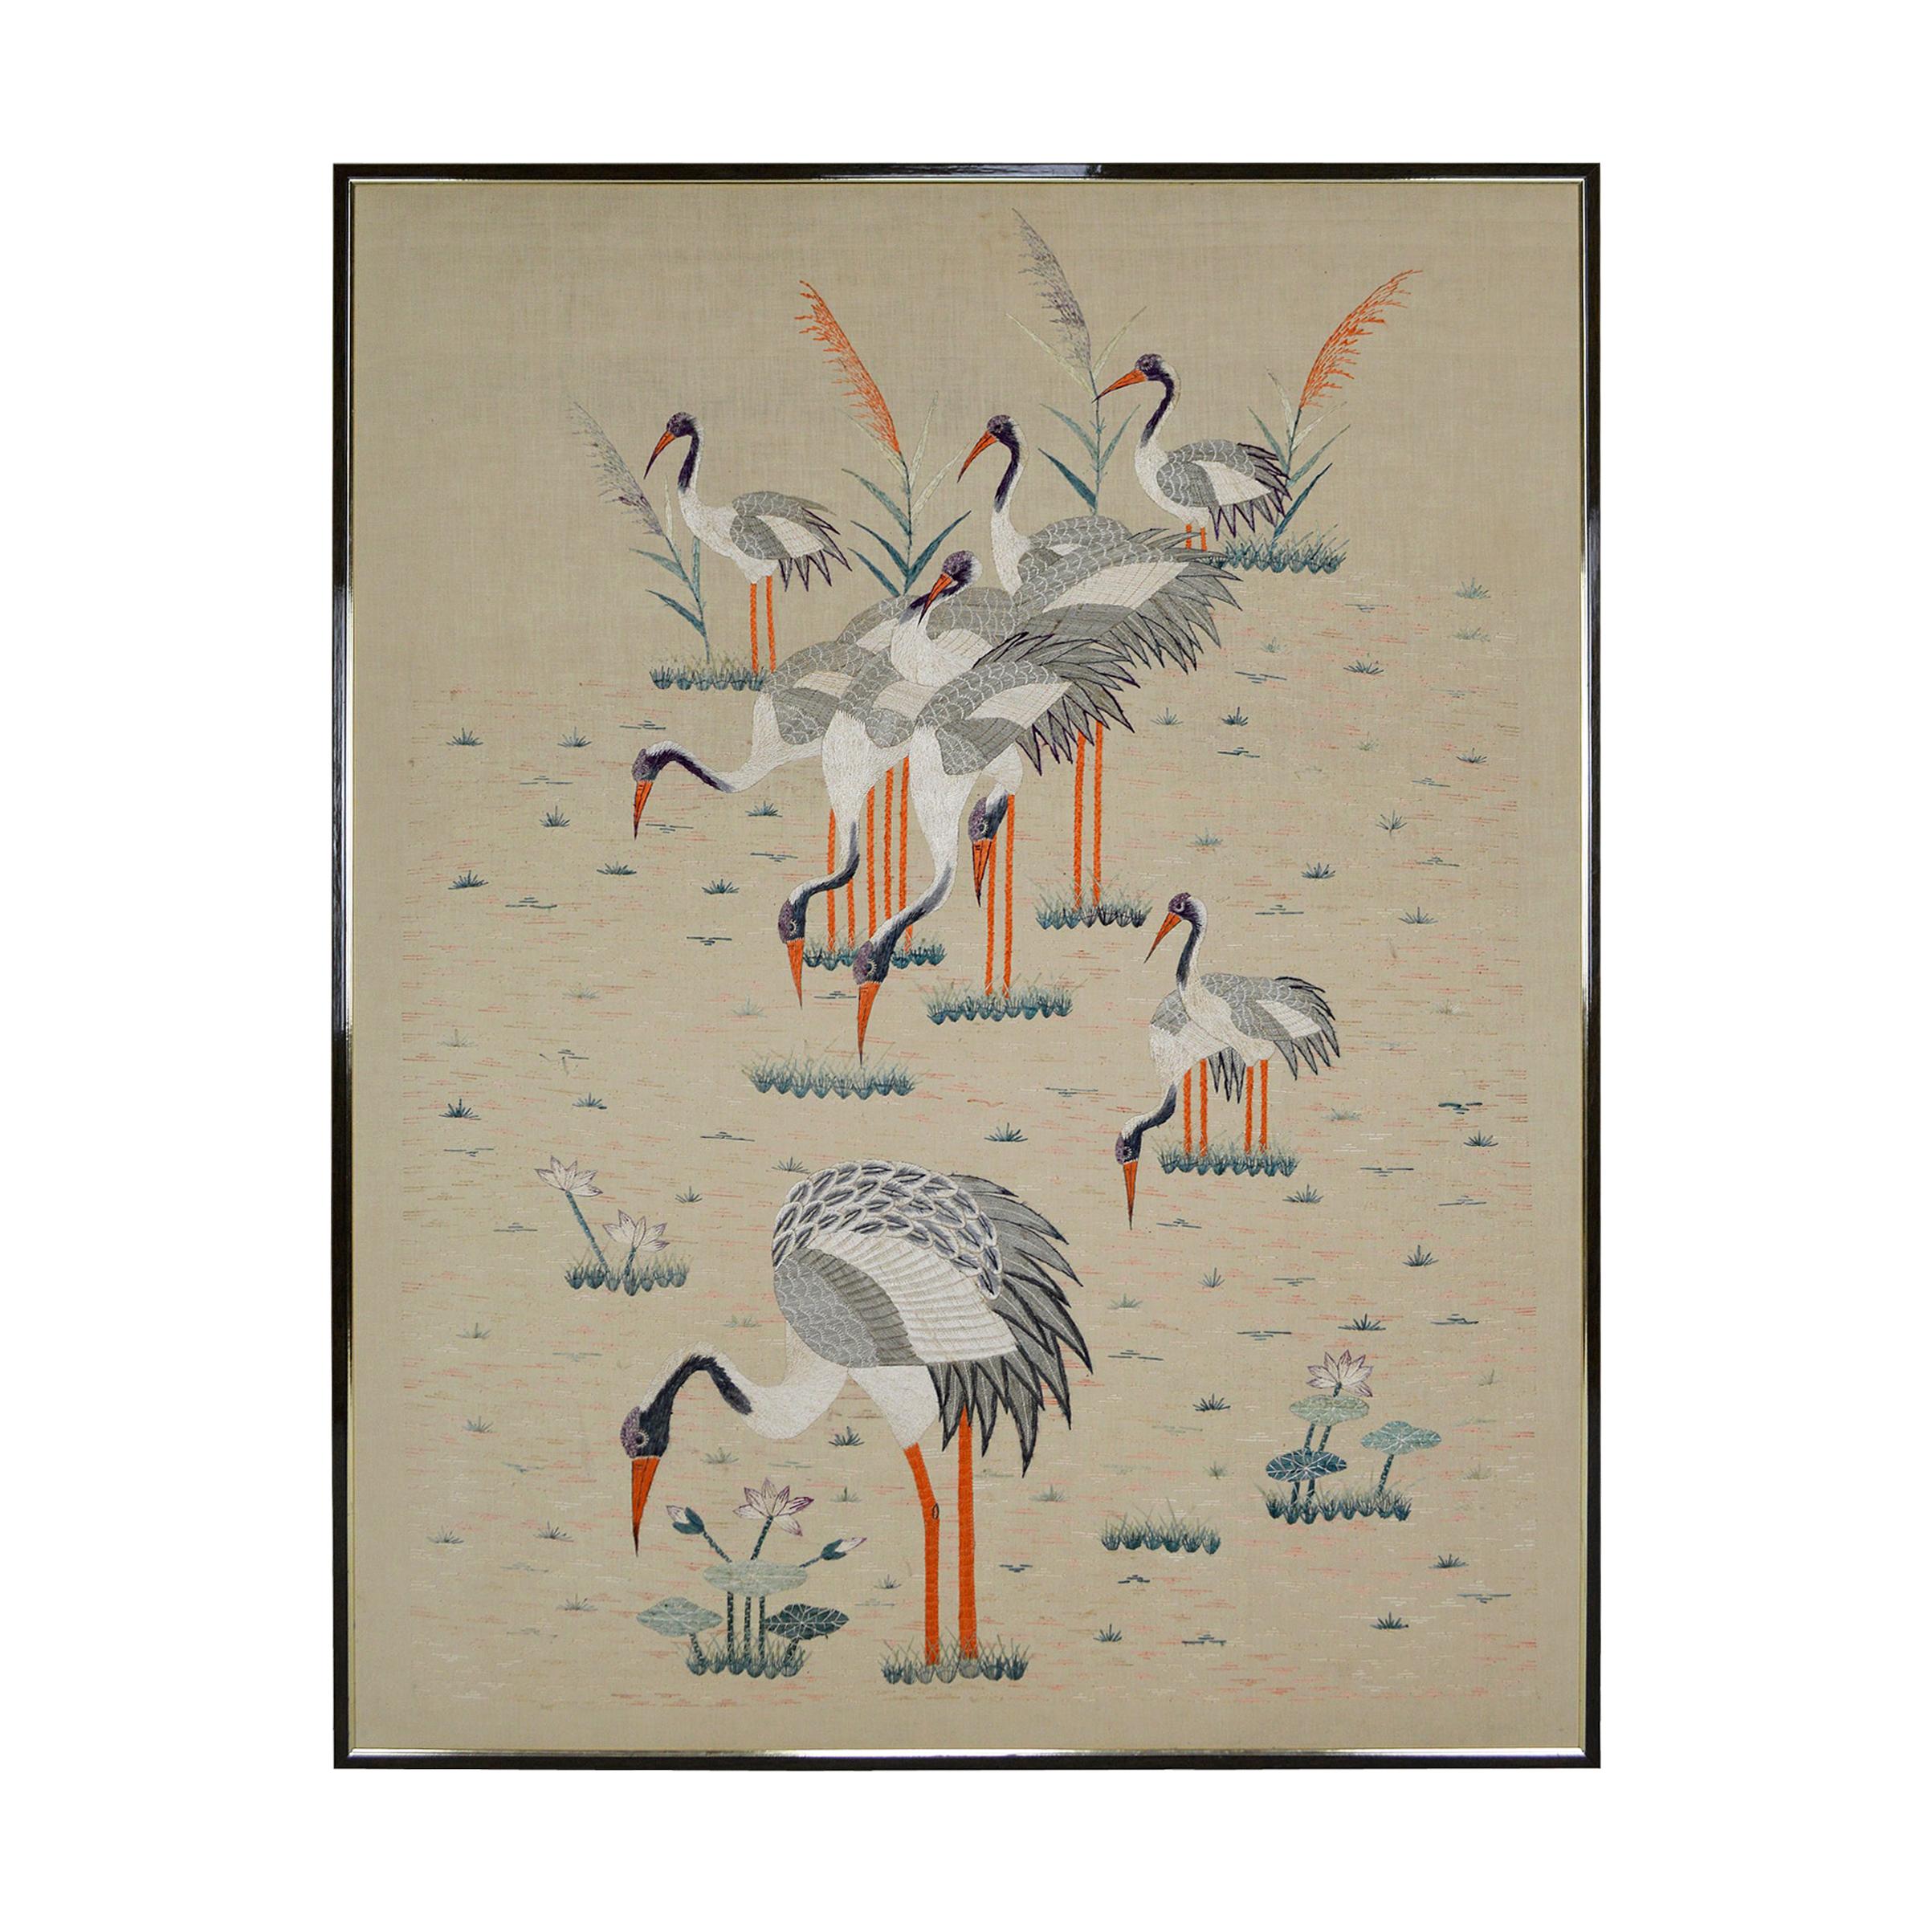 Large Framed Asian Silk Embroidery Tapestry, "Cranes", Art Deco Era, circa 1930 For Sale